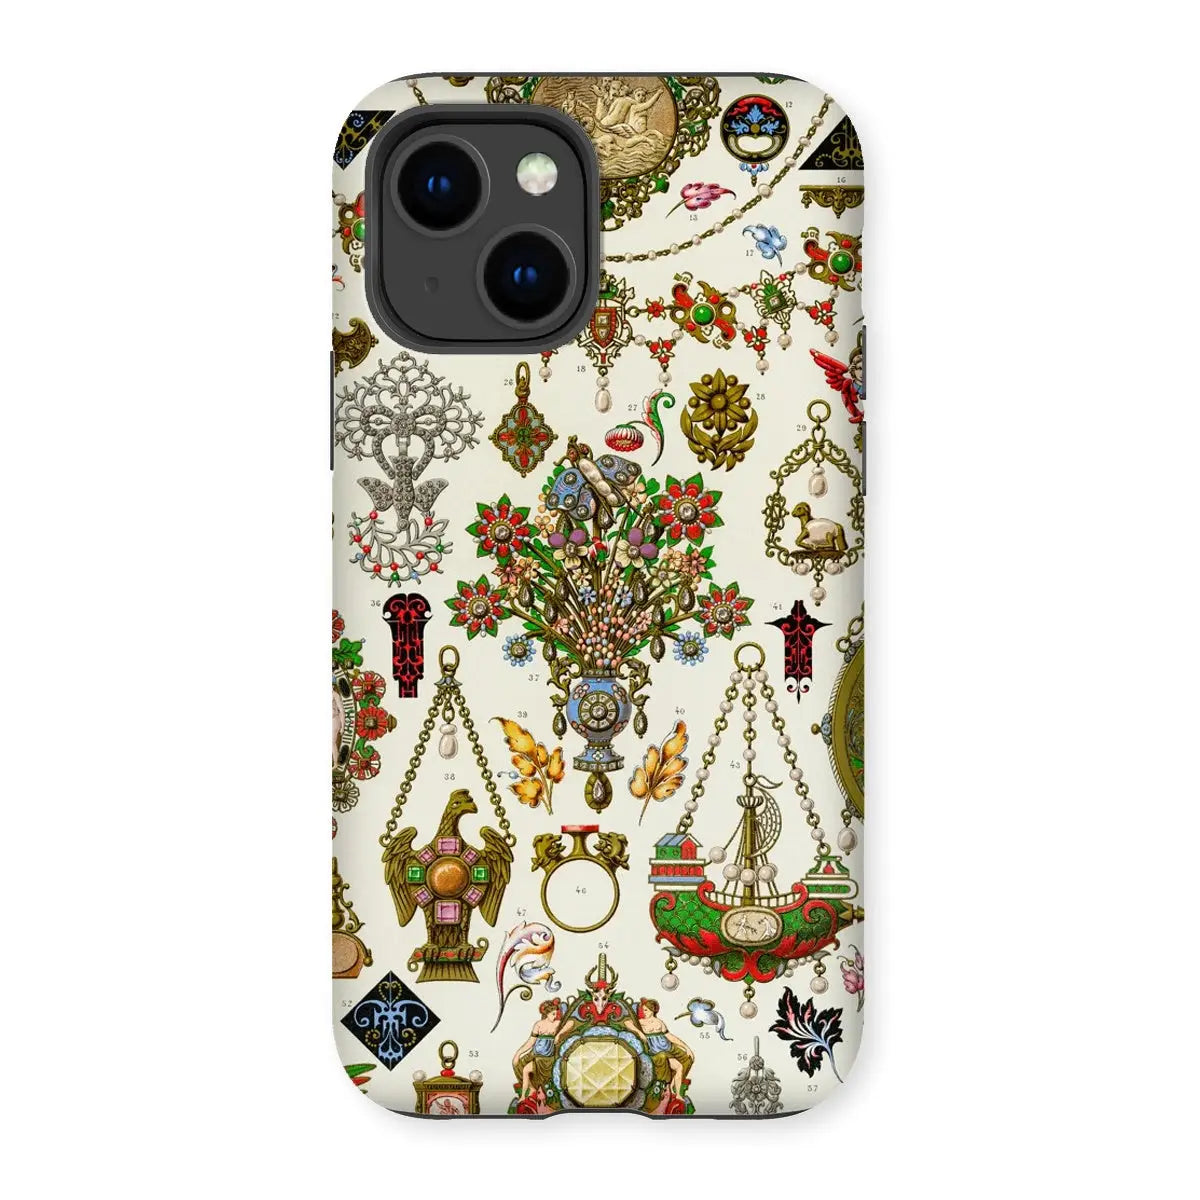 French Jewelry - Auguste Racinet Polychrome Art Phone Case - Iphone 14 / Matte - Mobile Phone Cases - Aesthetic Art